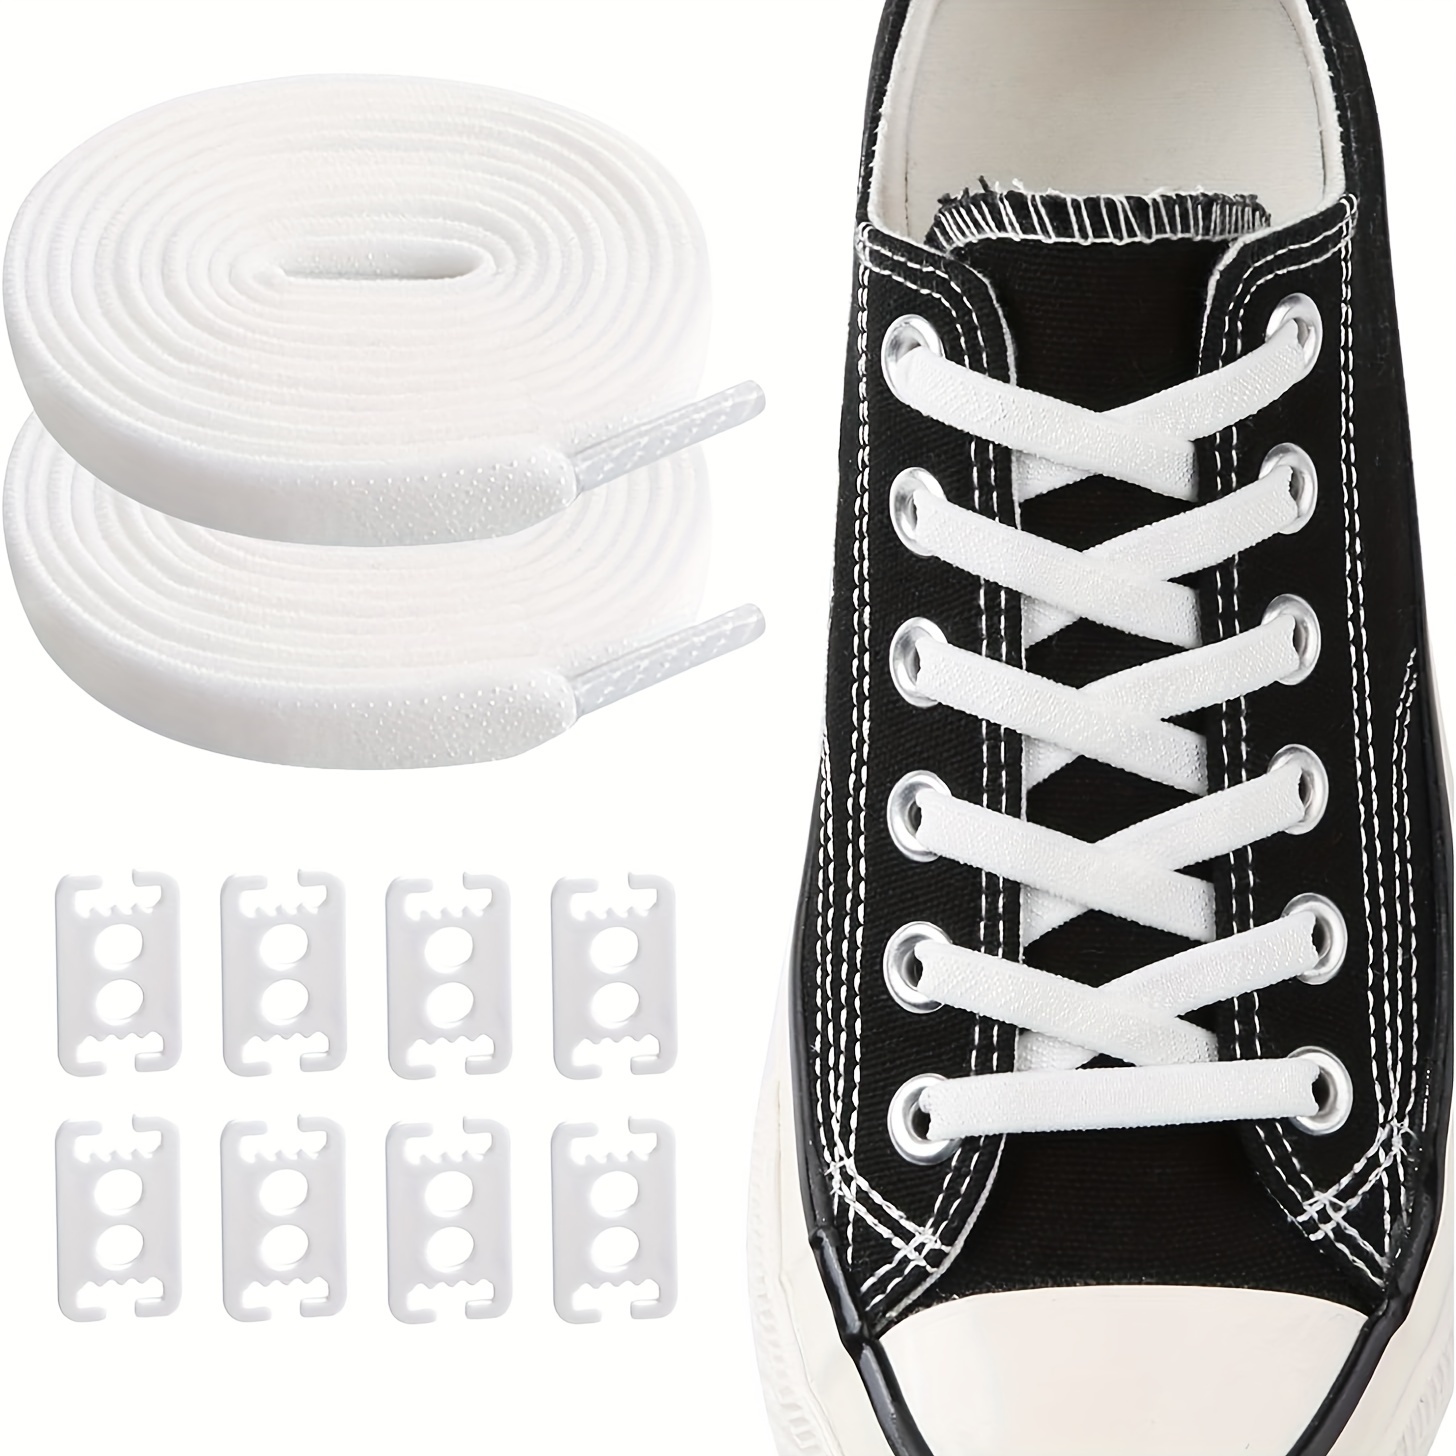 Elastic No Tie Flat Shoe Laces for Sneakers, Stretch Tieless Shoelaces for  Kids